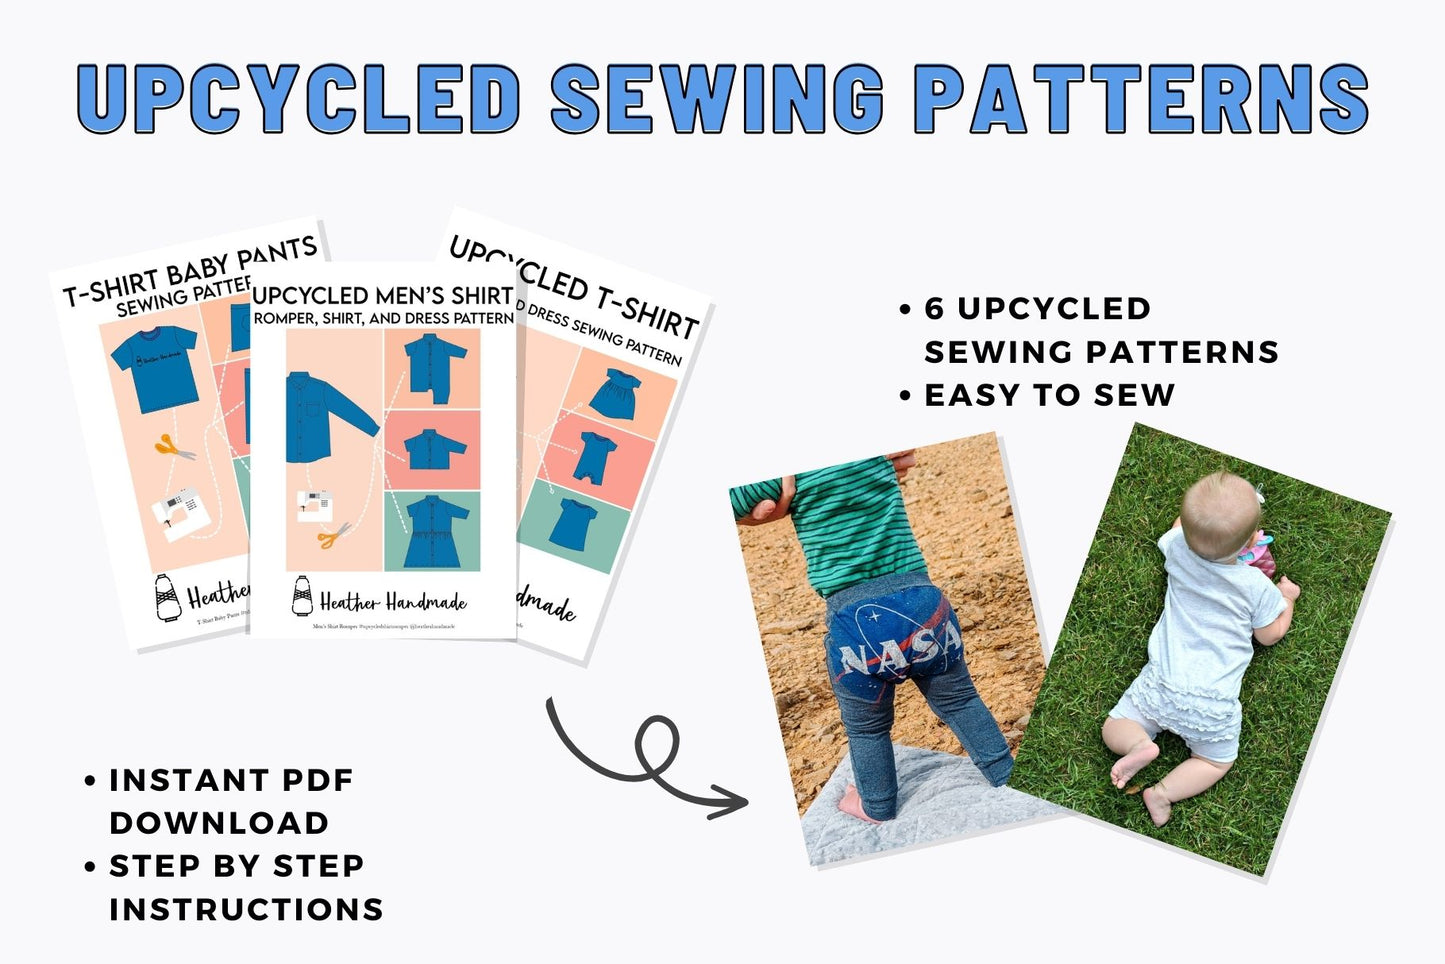 Upcycled Baby Sewing Pattern Bundle